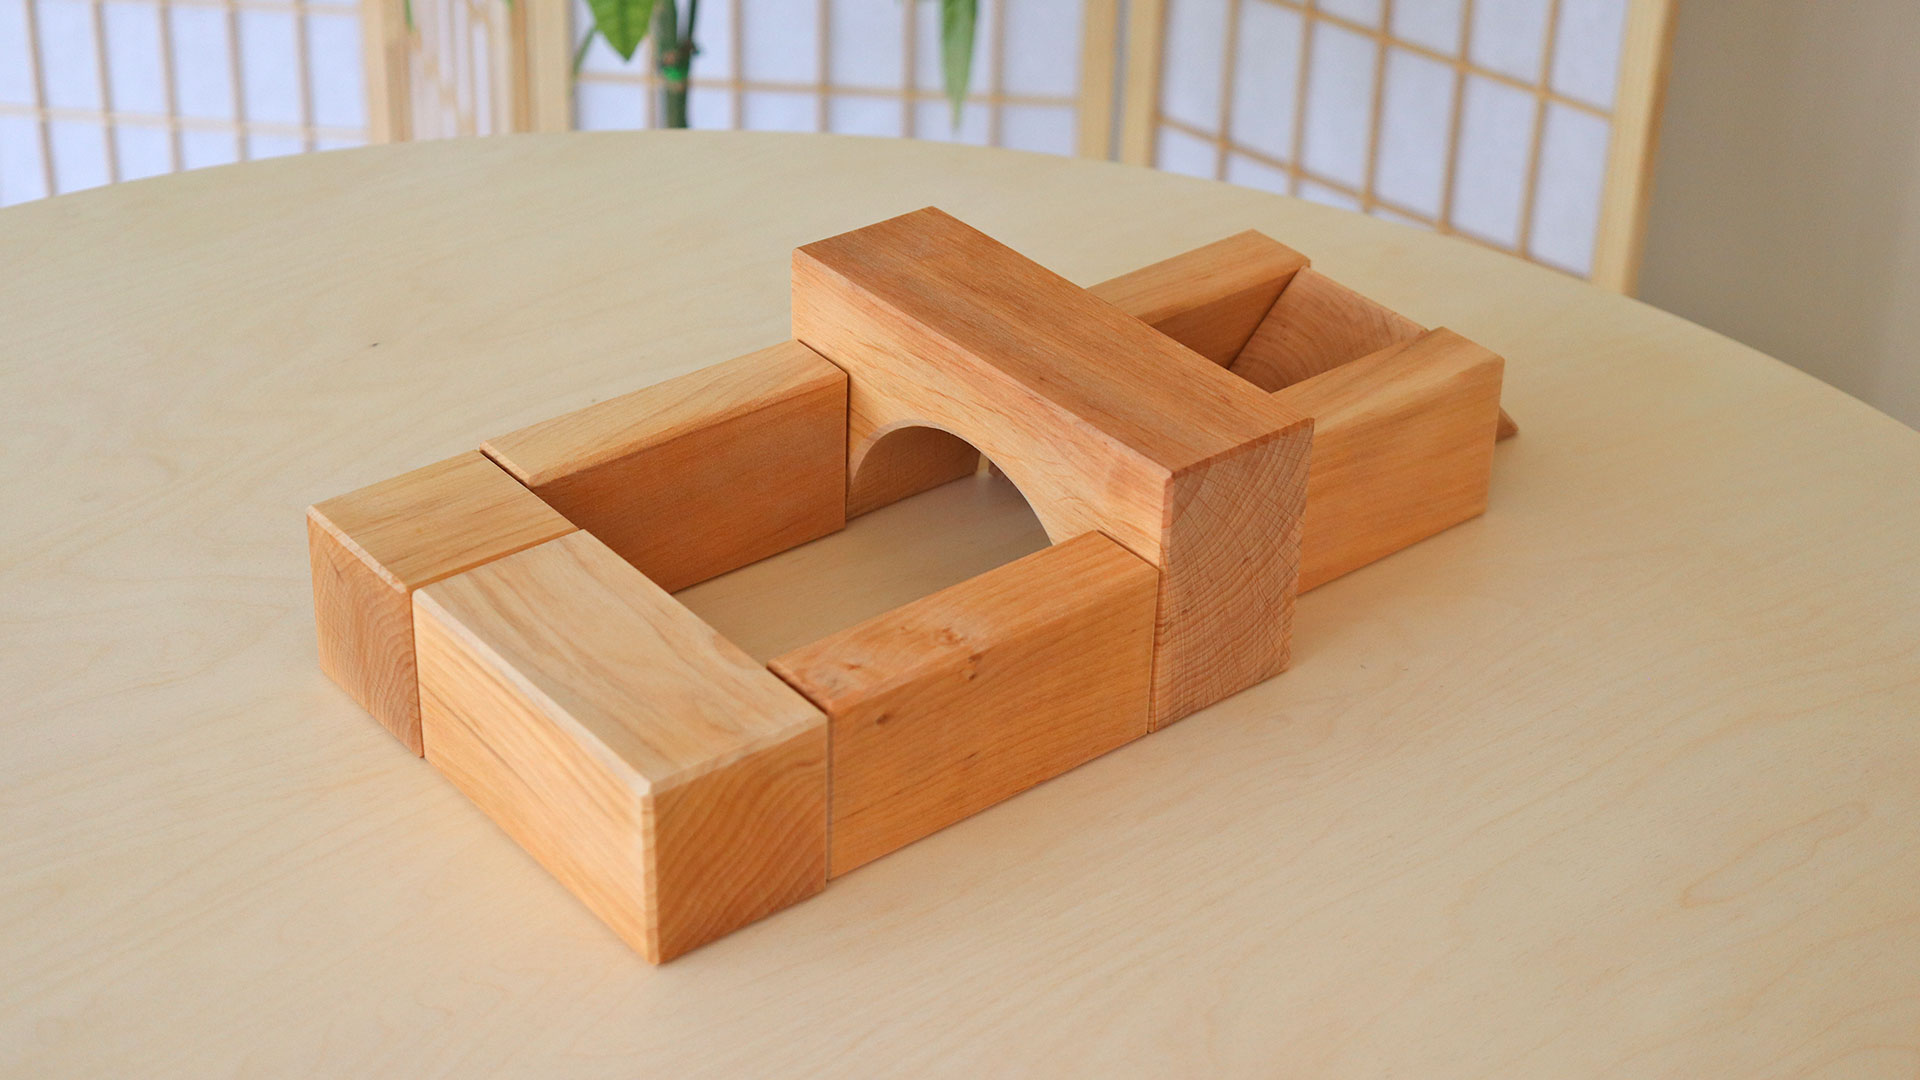 Setting up with large wooden building blocks on a table.